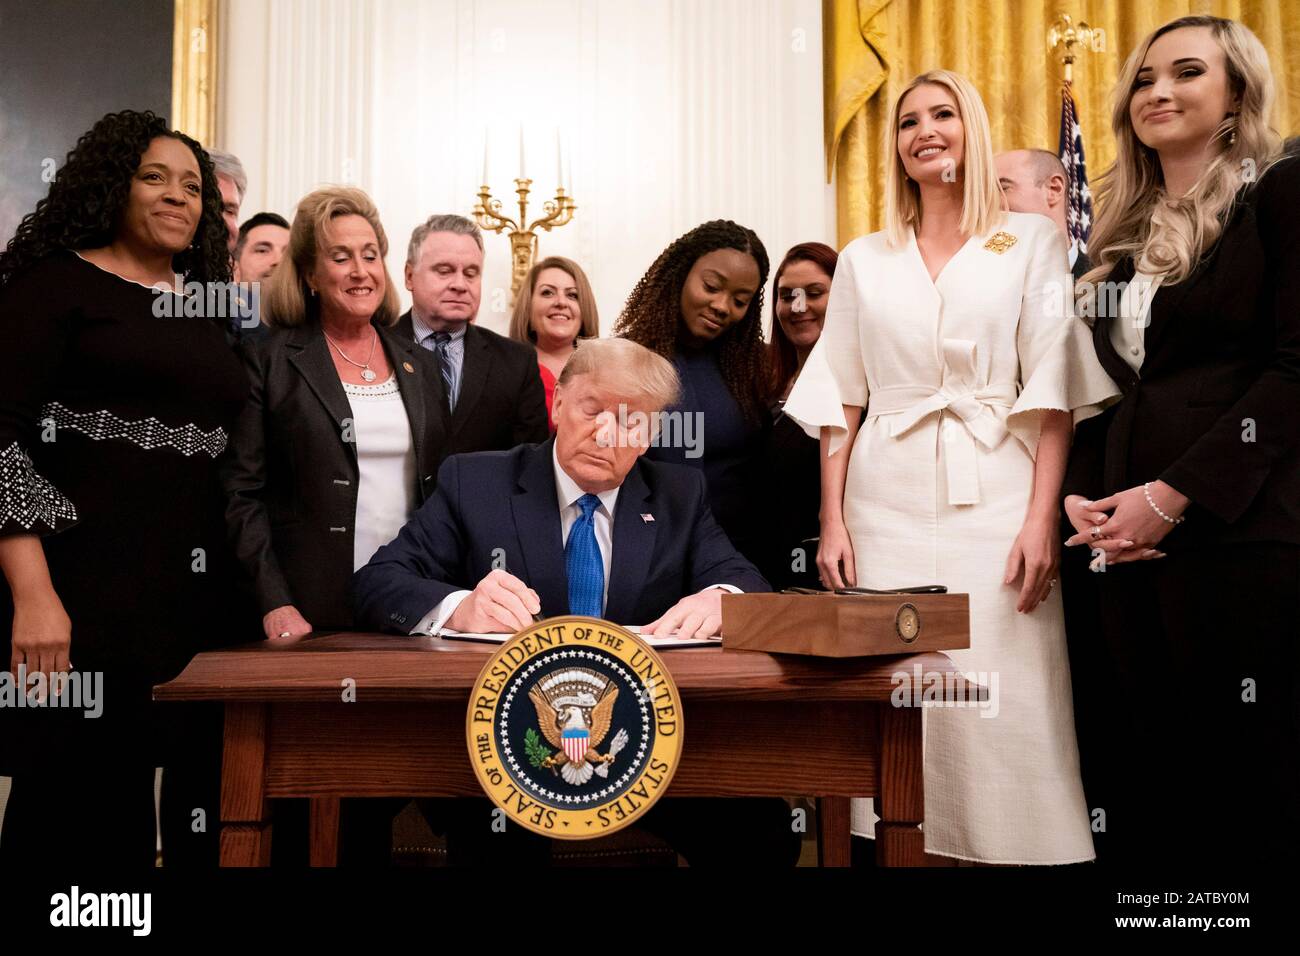 Washington, United States Of America. 31st Jan, 2020. Washington, United States of America. 31 January, 2020. U.S President Donald Trump, surrounded by survivors, officials and his daughter Ivanka Trump, right, signs an executive order to help combat human trafficking during a ceremony in the East Room of the White House January 31, 2020 in Washington, DC. The event took place following the White House Summit on Human Trafficking in honor of the 20th Anniversary of the Trafficking Victims Protection Act. Credit: Tia Dufour/White House Photo/Alamy Live News Stock Photo